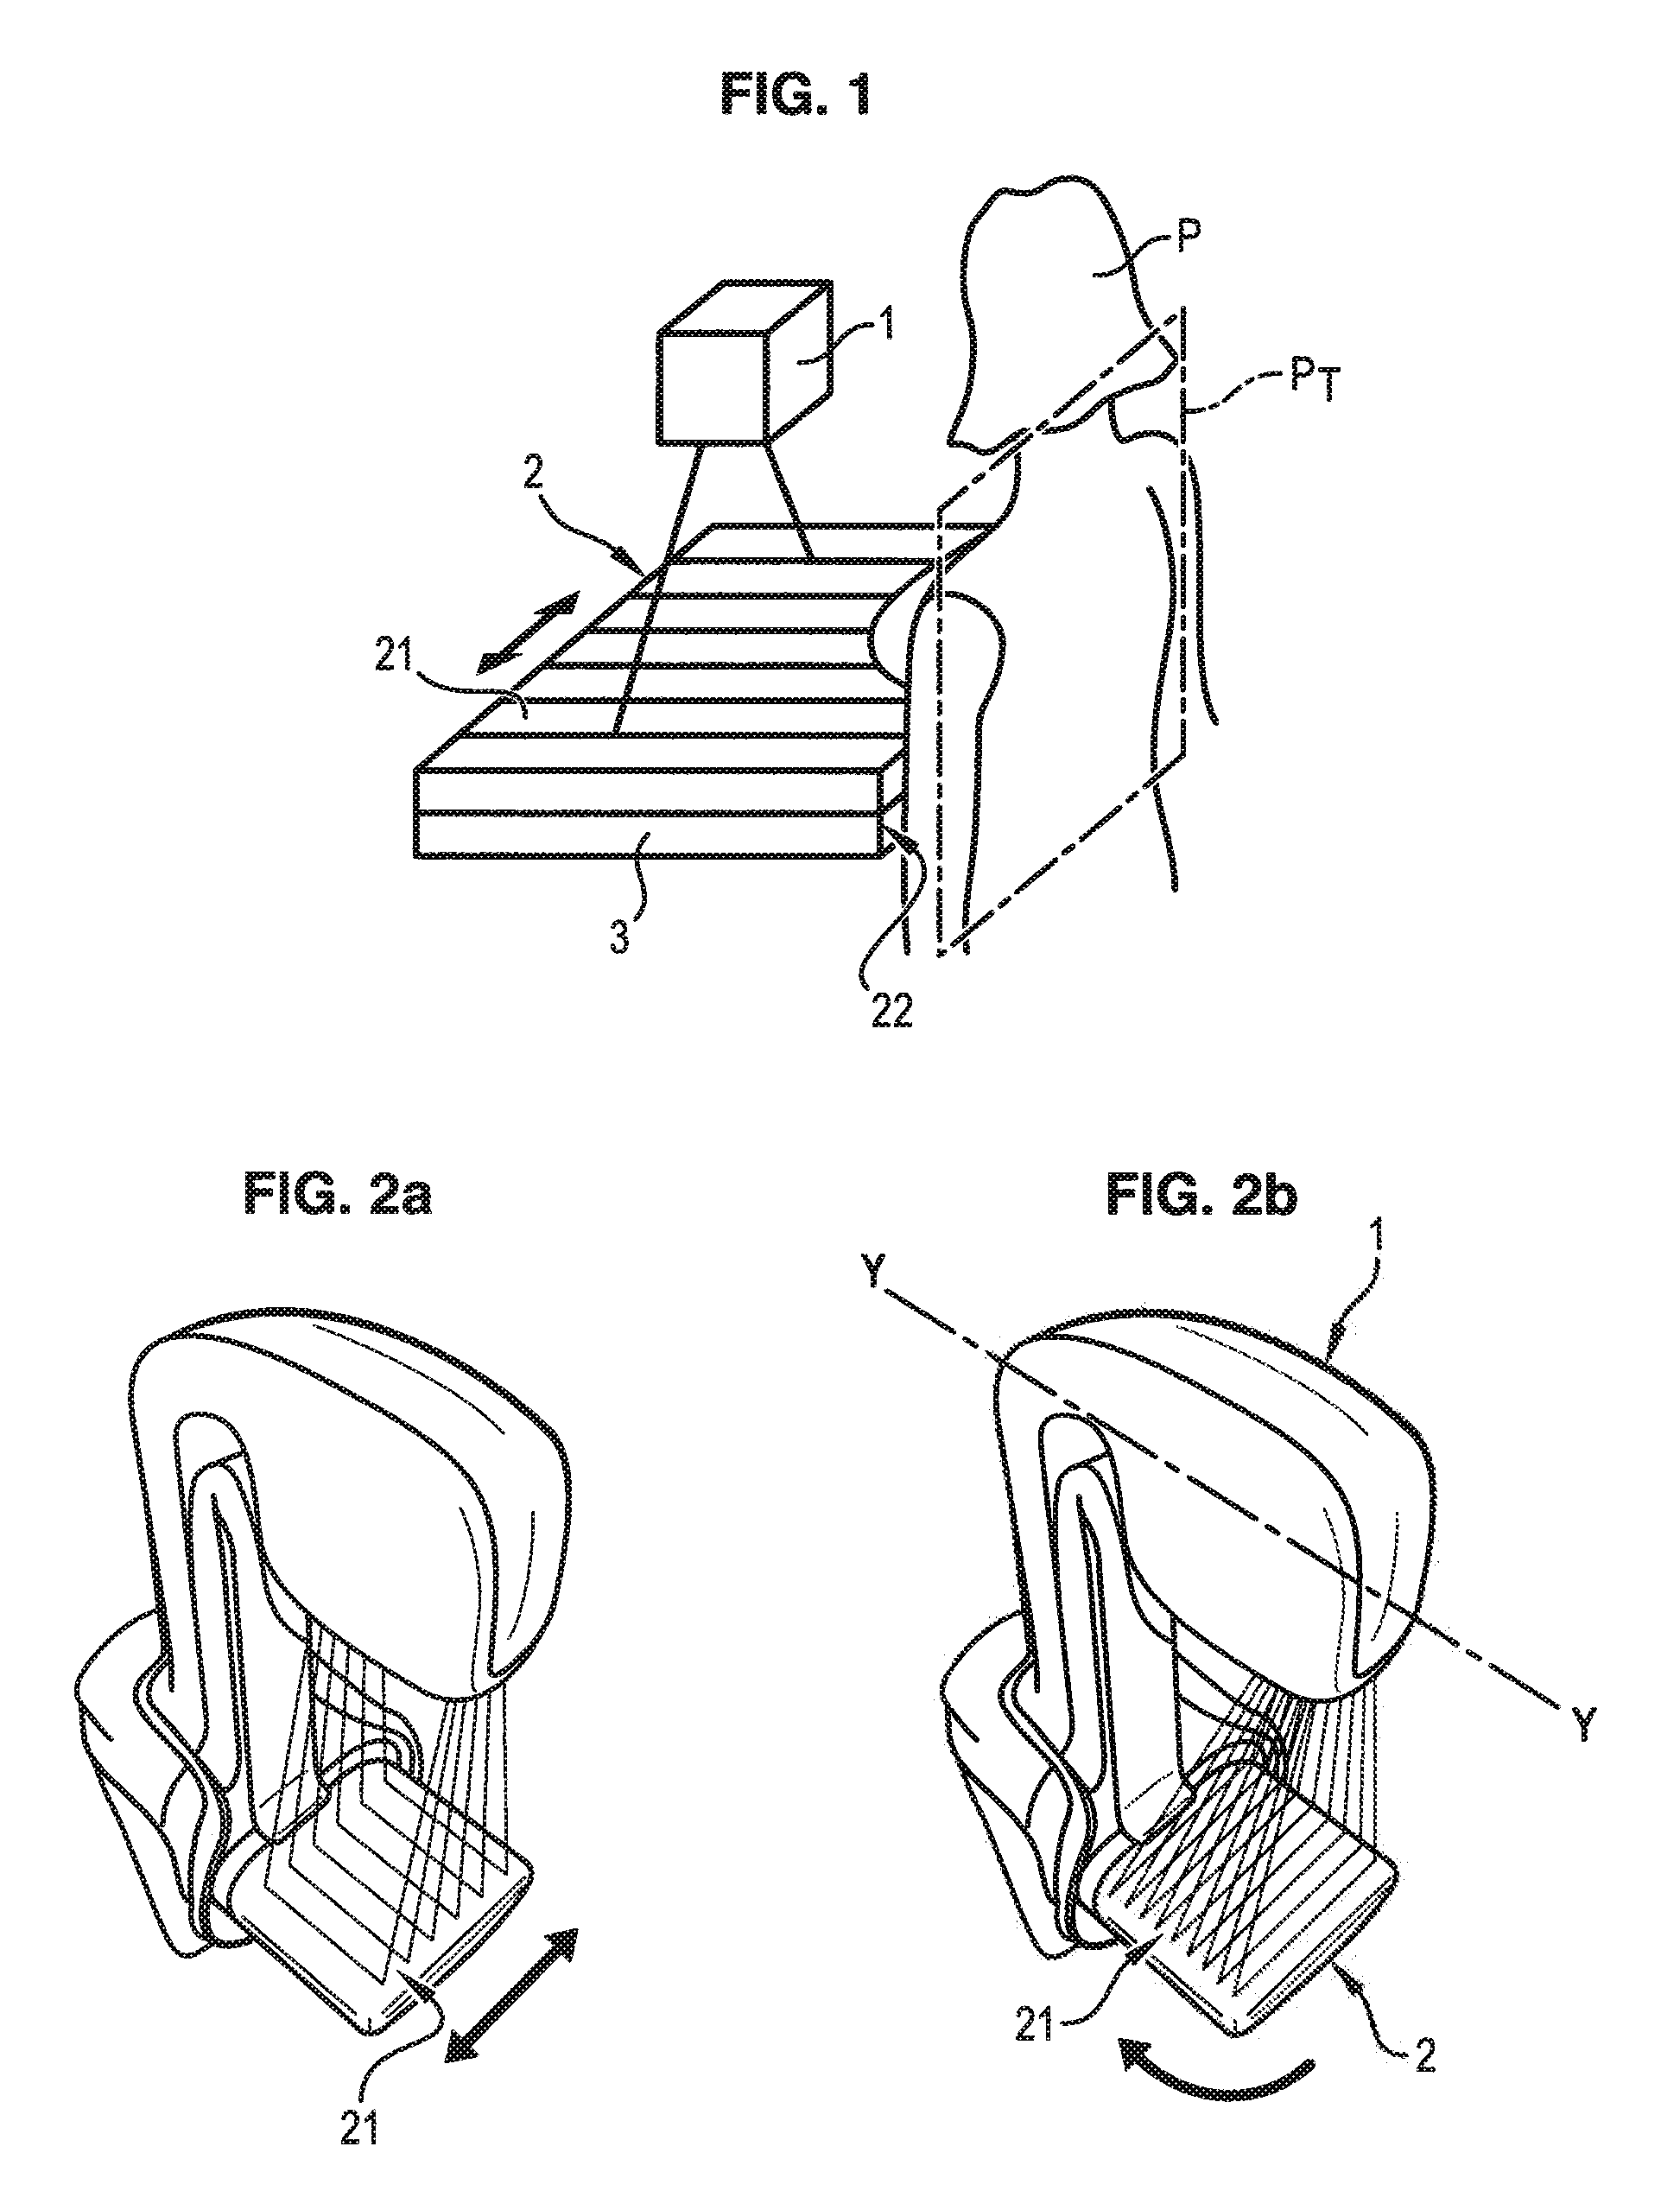 Process and device for deploying an Anti-scattering grid